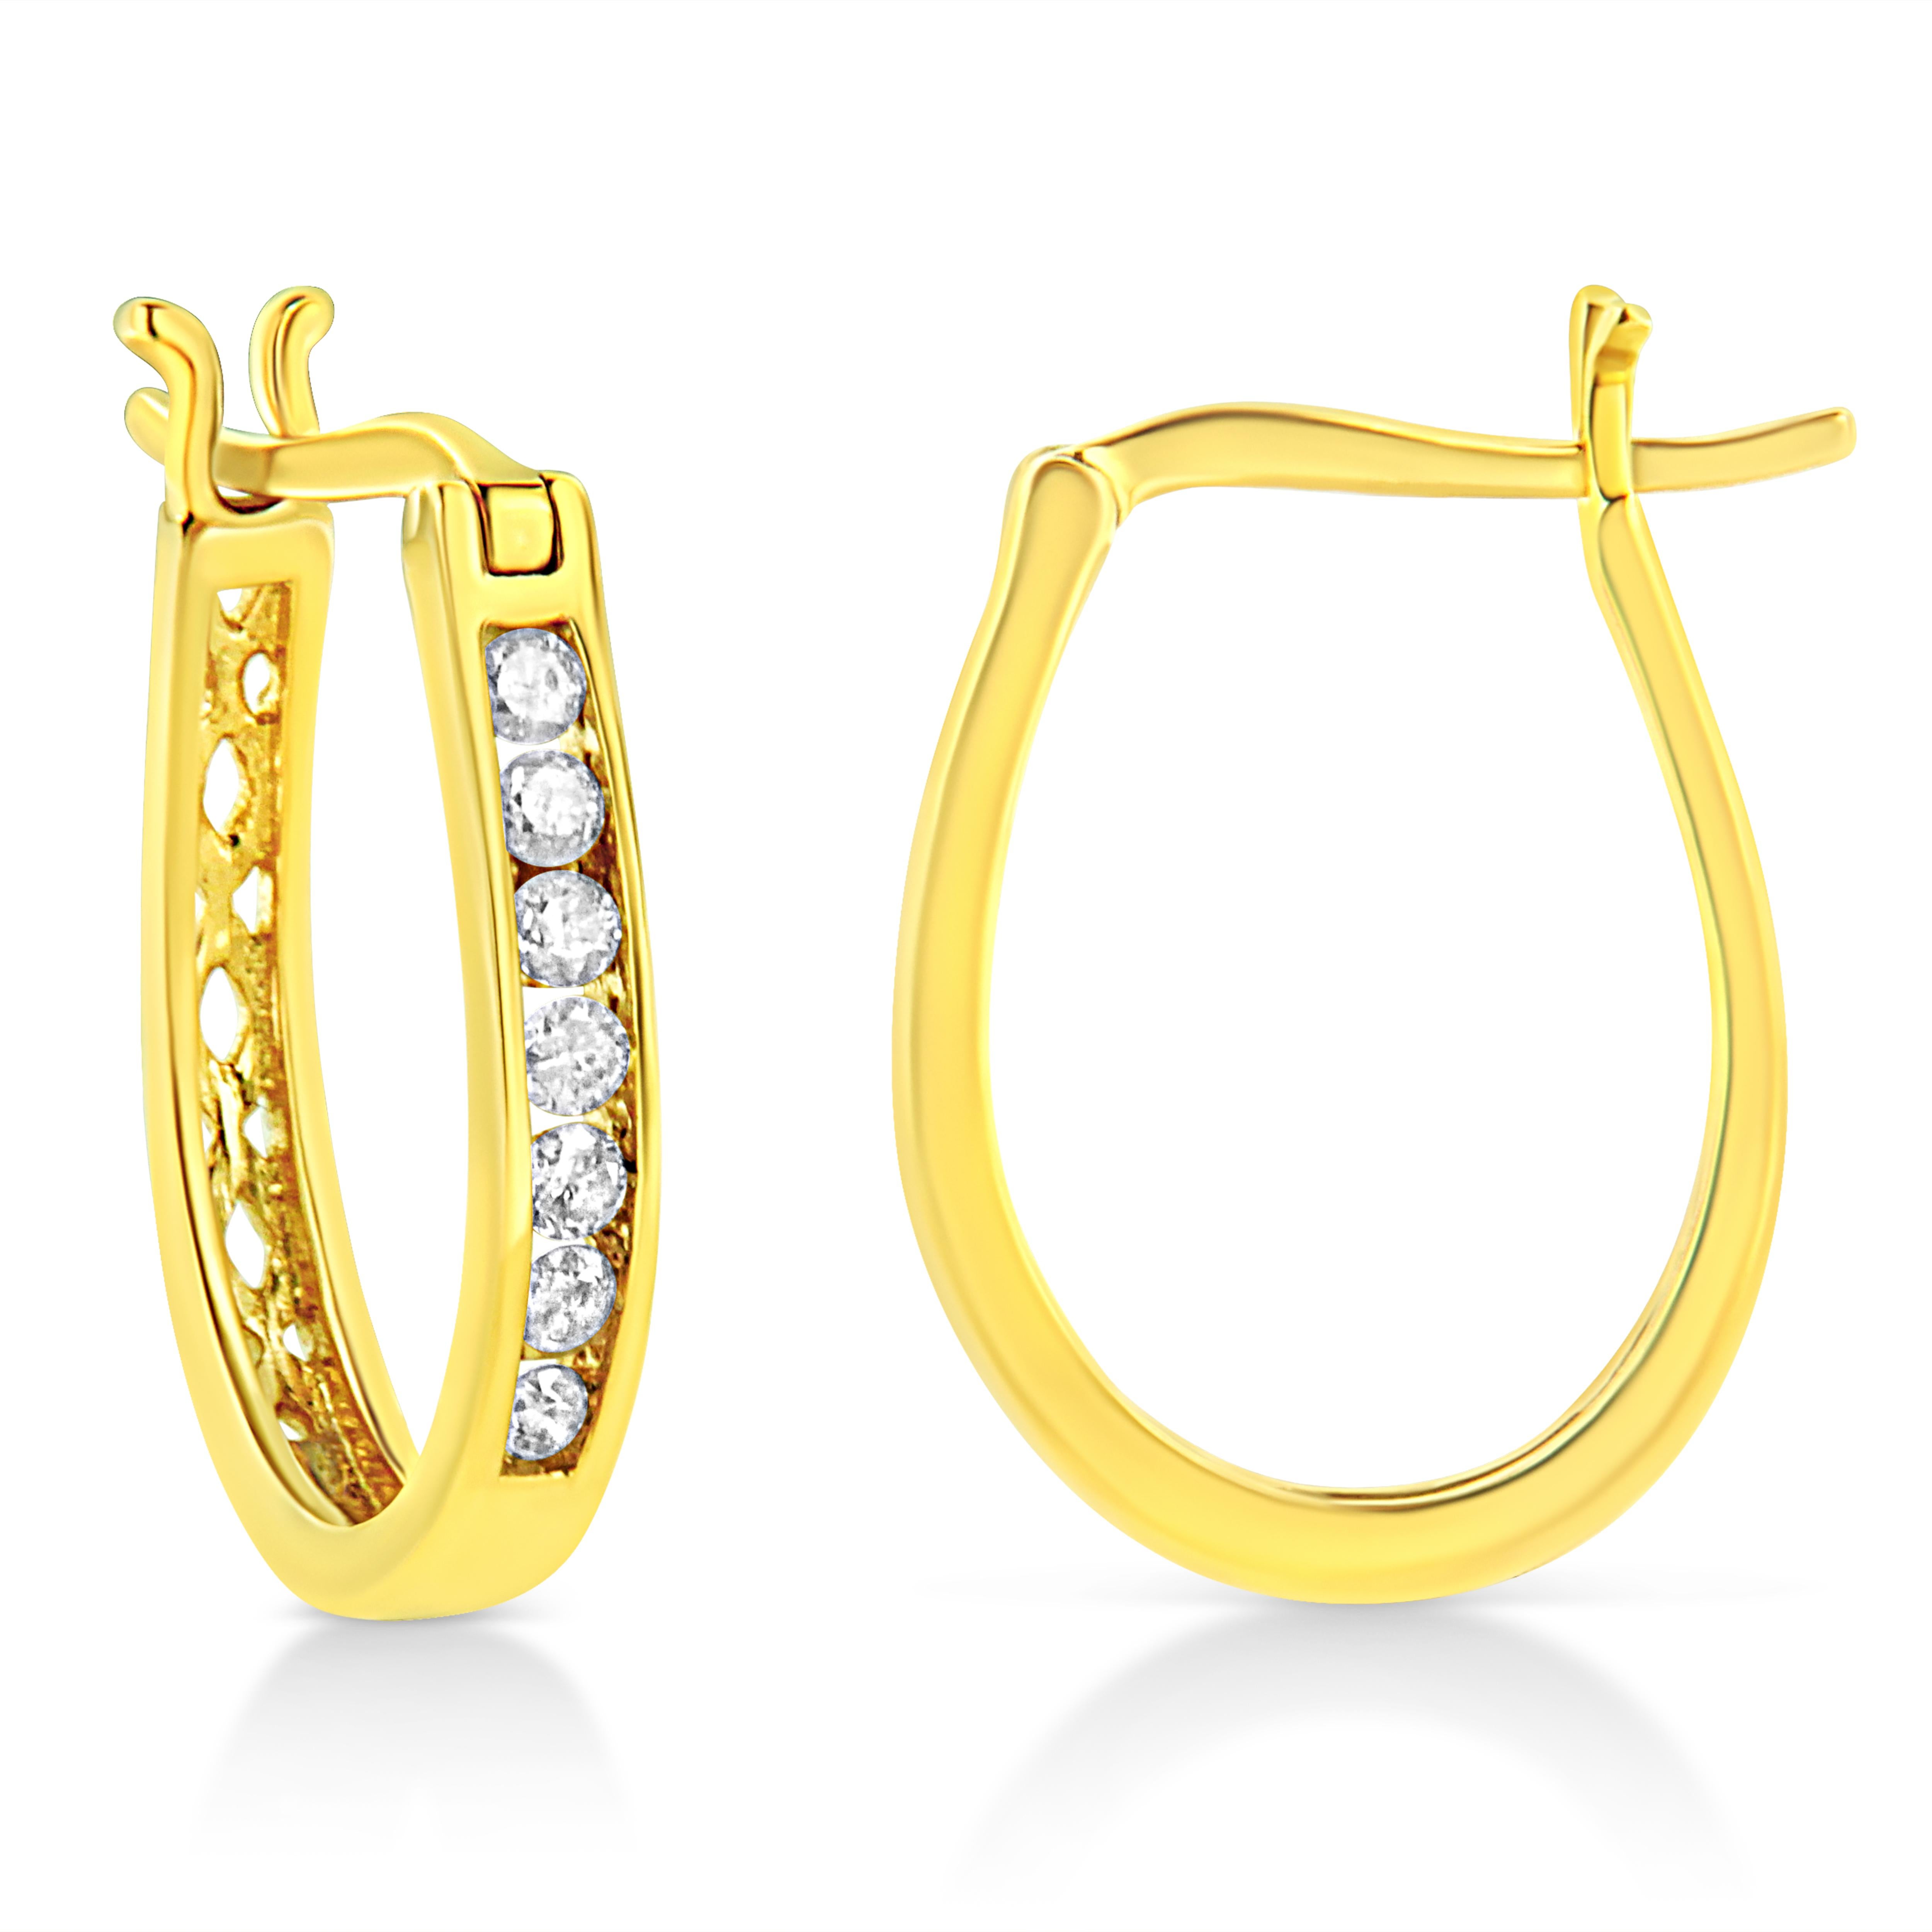 The power of diamonds is truly transformative! Our secret to great style is in classic accessories like this pair of 1/4 ct. t.w. round brilliant-cut diamond hoops. The sparkling gemstones shine in their elegant channel setting. Crafted 14k Yellow